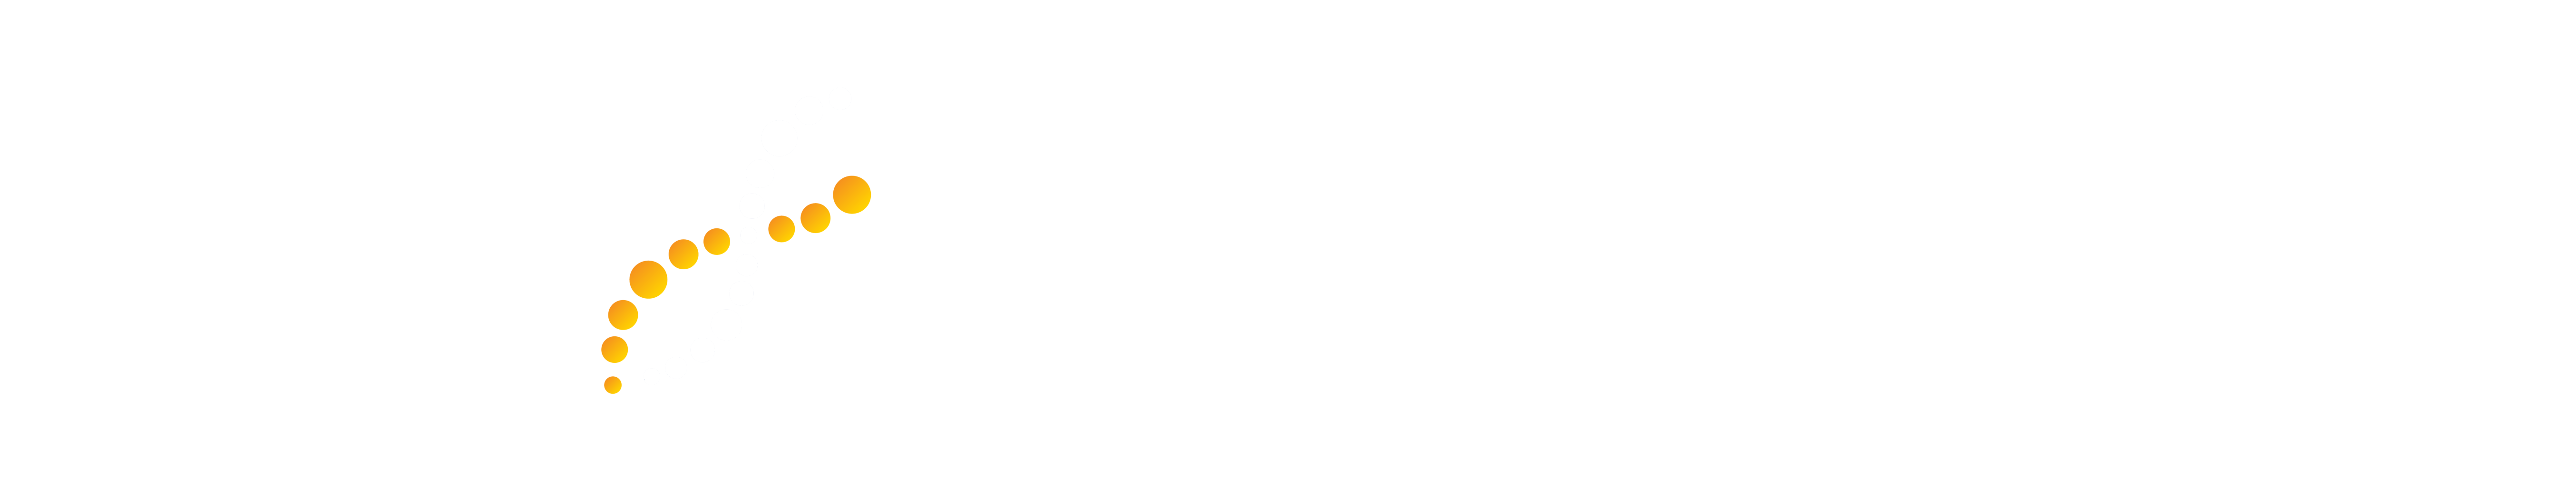 Lions Medical Research Foundation SA